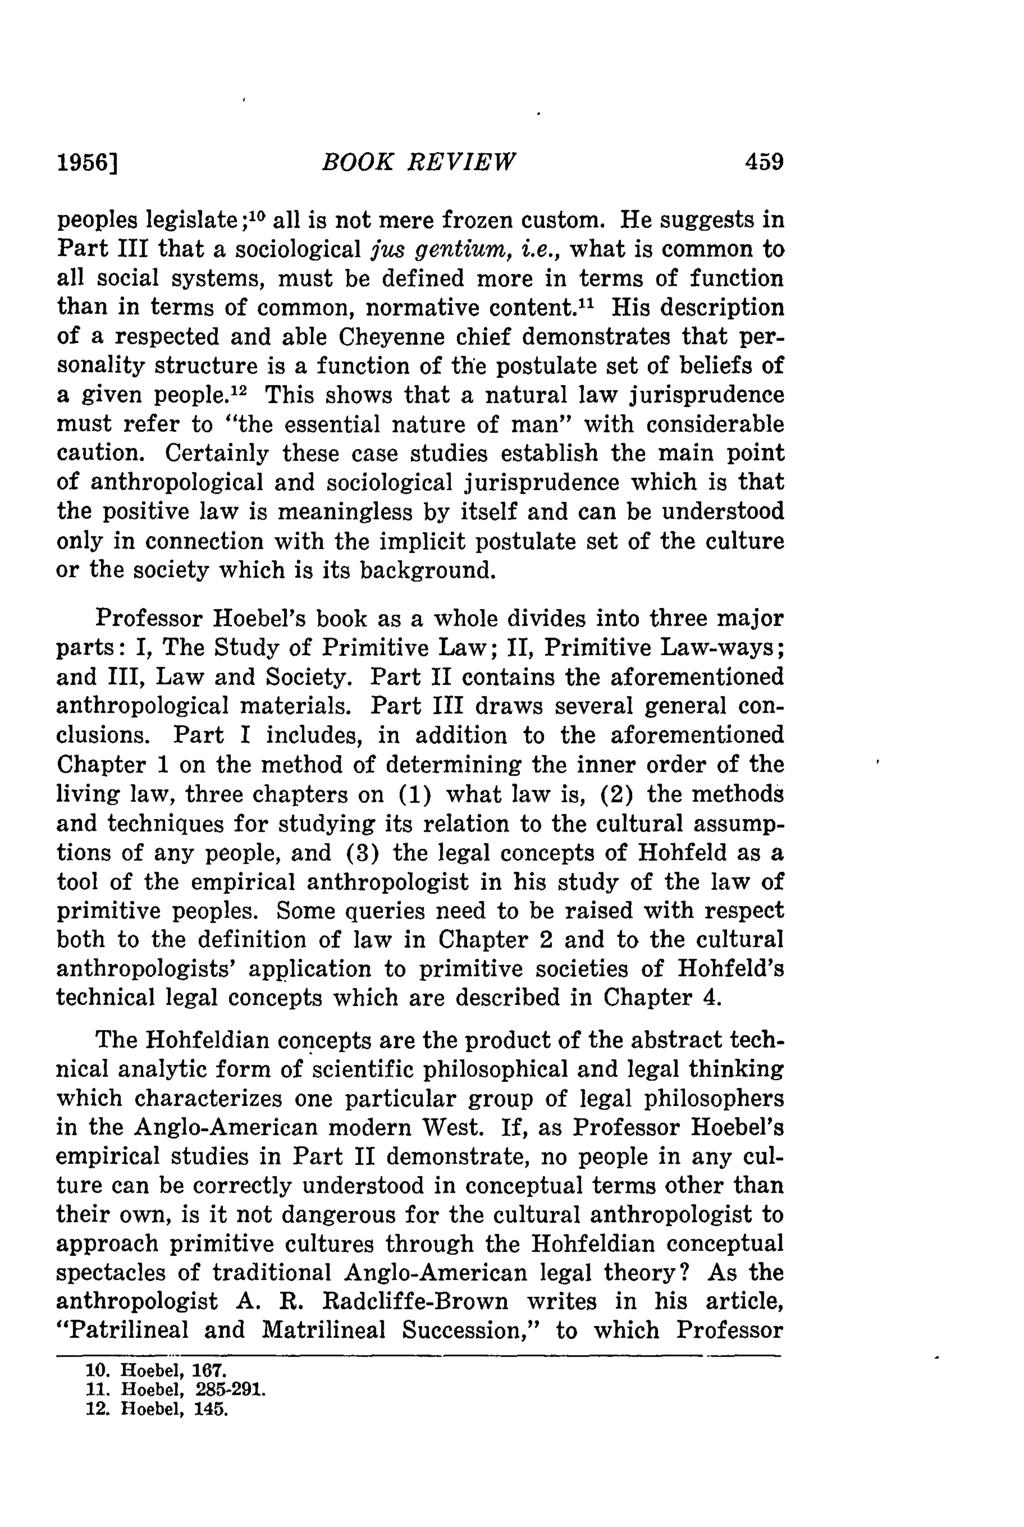 1956] BOOK REVIEW peoples legislate ;20 all is not mere frozen custom. He suggests in Part III that a sociological jus gentium, i.e., what is common to all social systems, must be defined more in terms of function than in terms of common, normative content.